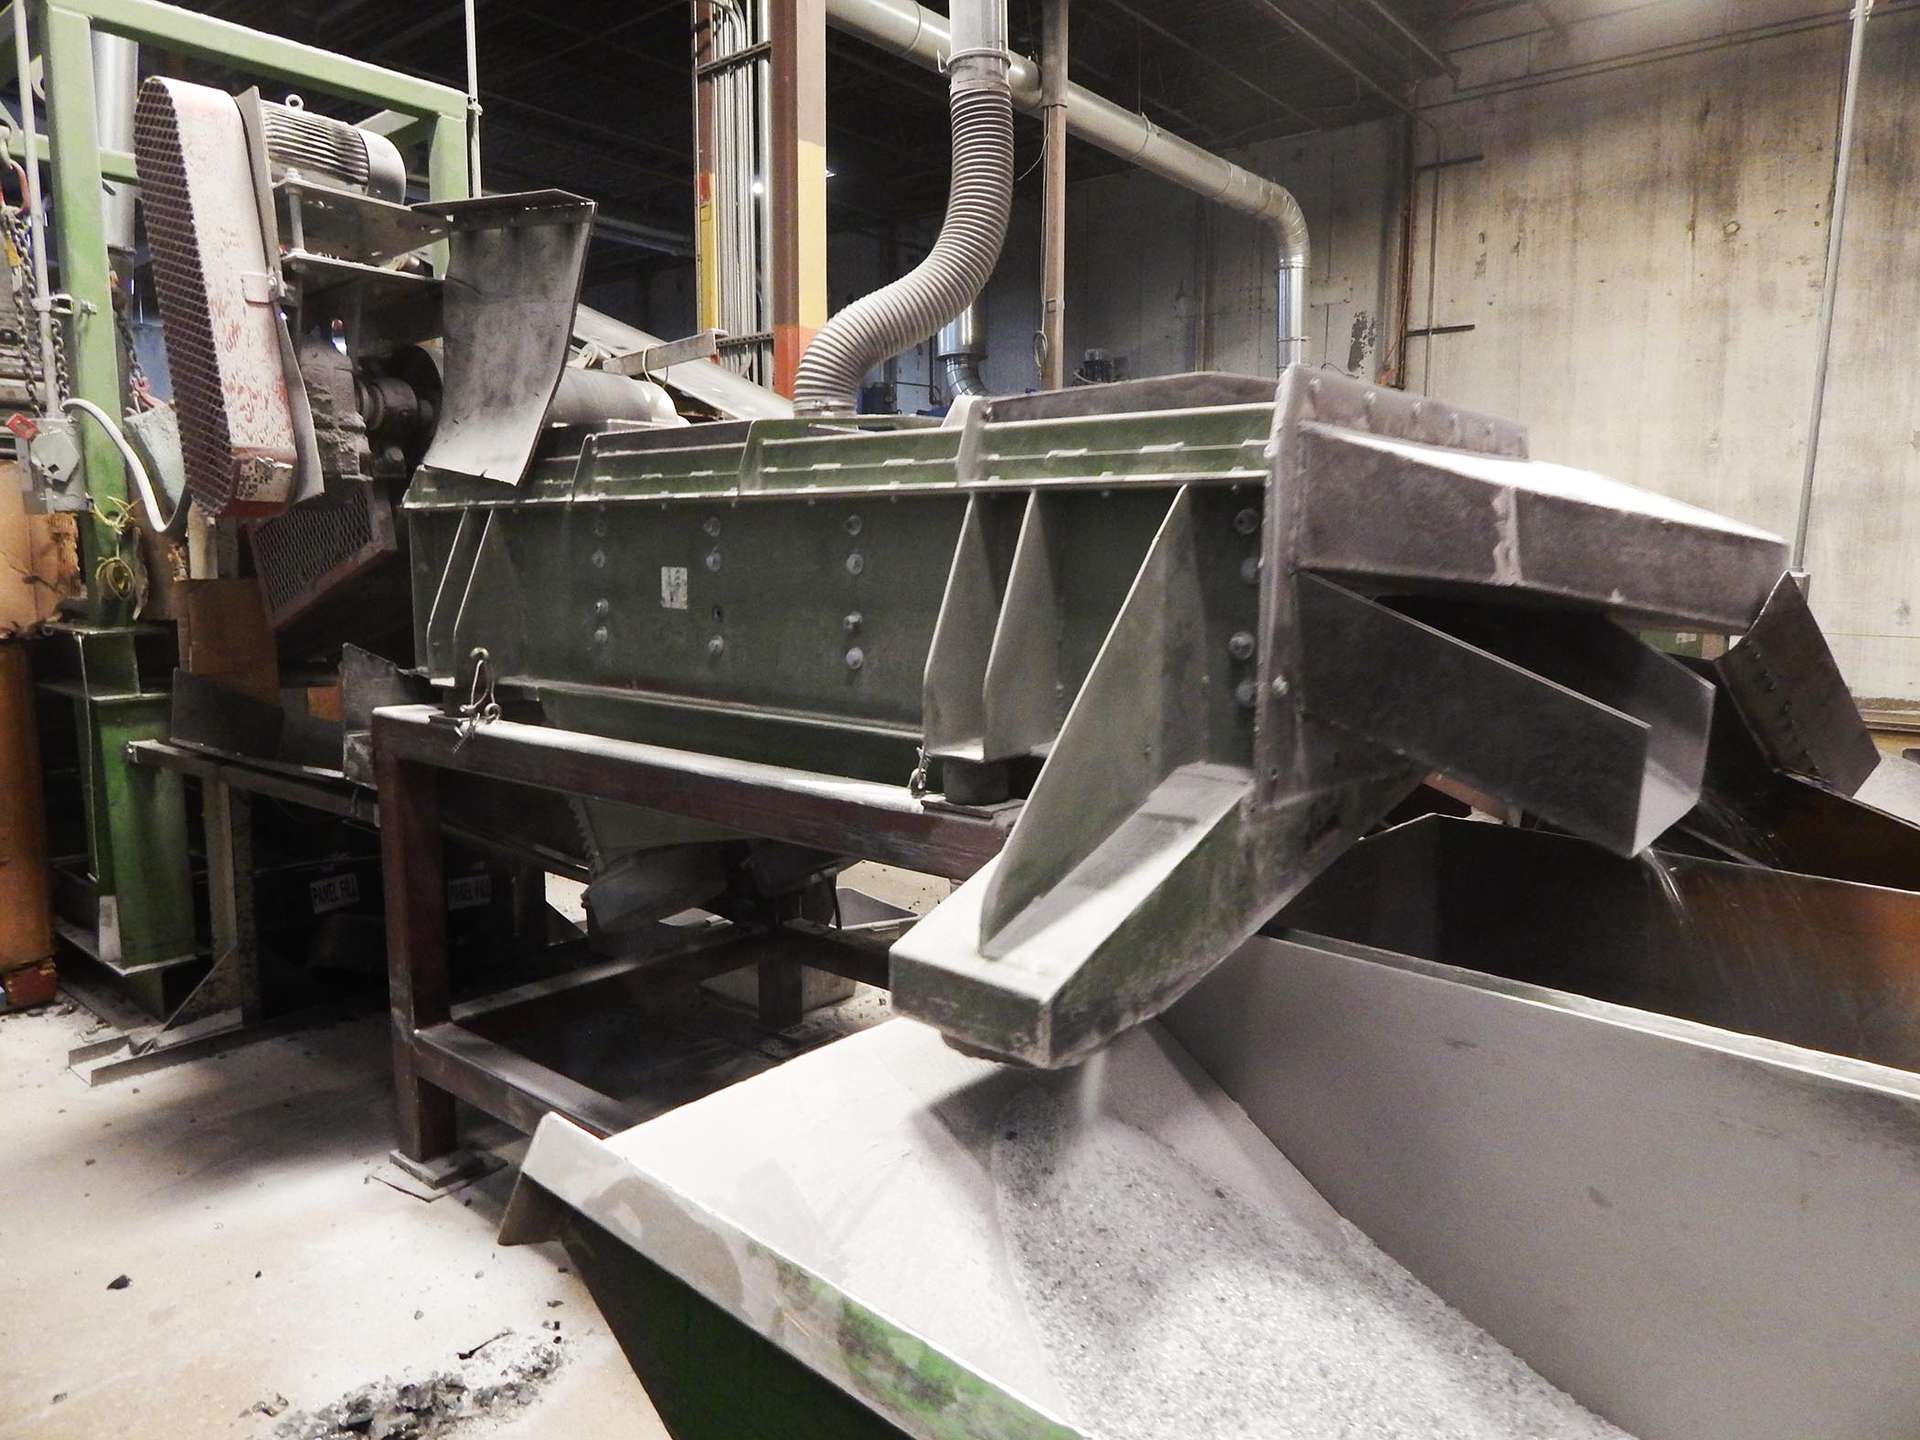 vibratory screener removing fines from materials